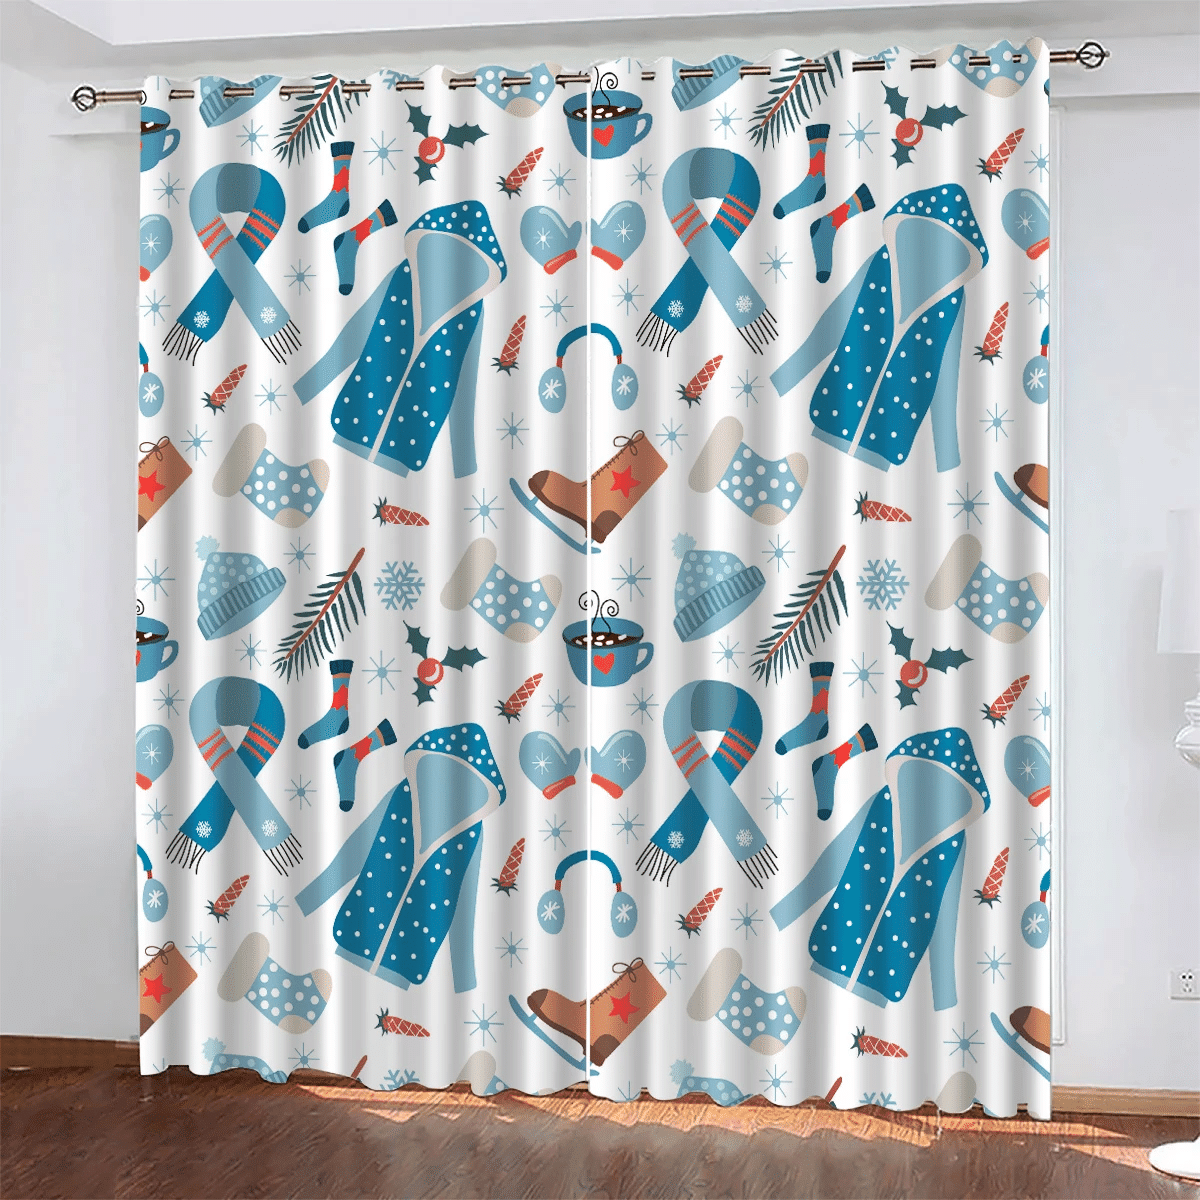 Merry Christmas With Holly Winter Clothers And Scarf Window Curtains Door Curtains Home Decor